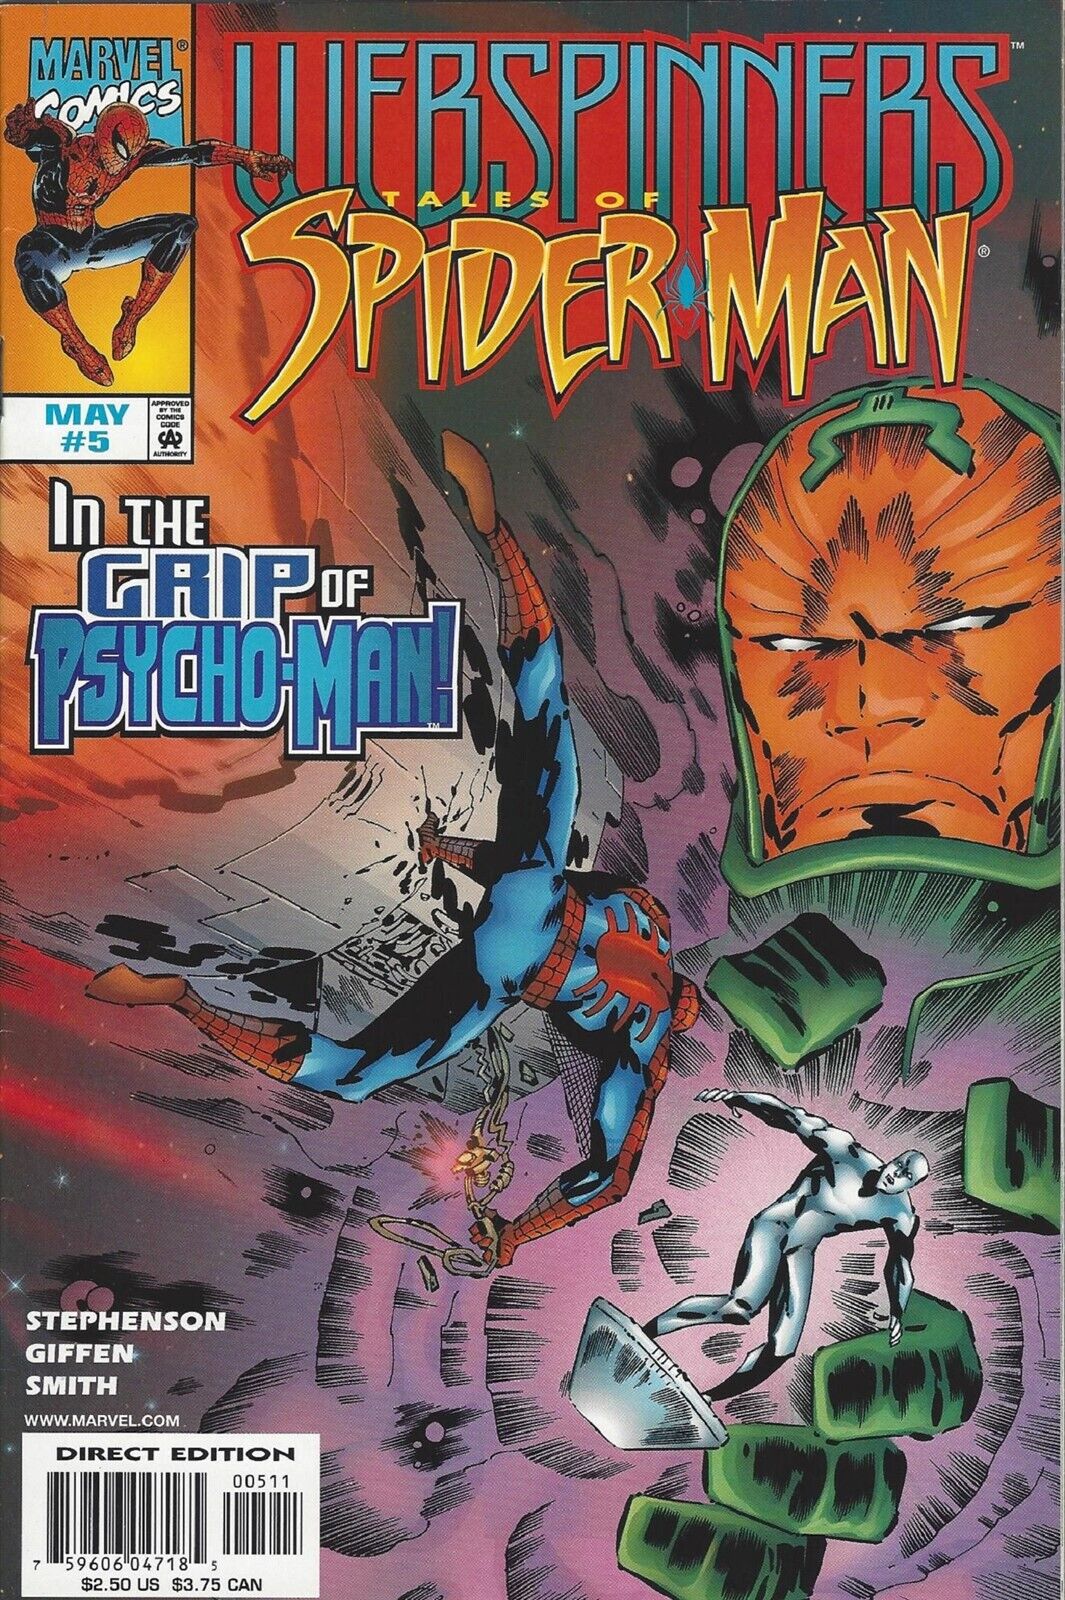 Webspinners: Tales of Spider-Man Vol. 1 #5 In the Grip of Psycho-Man